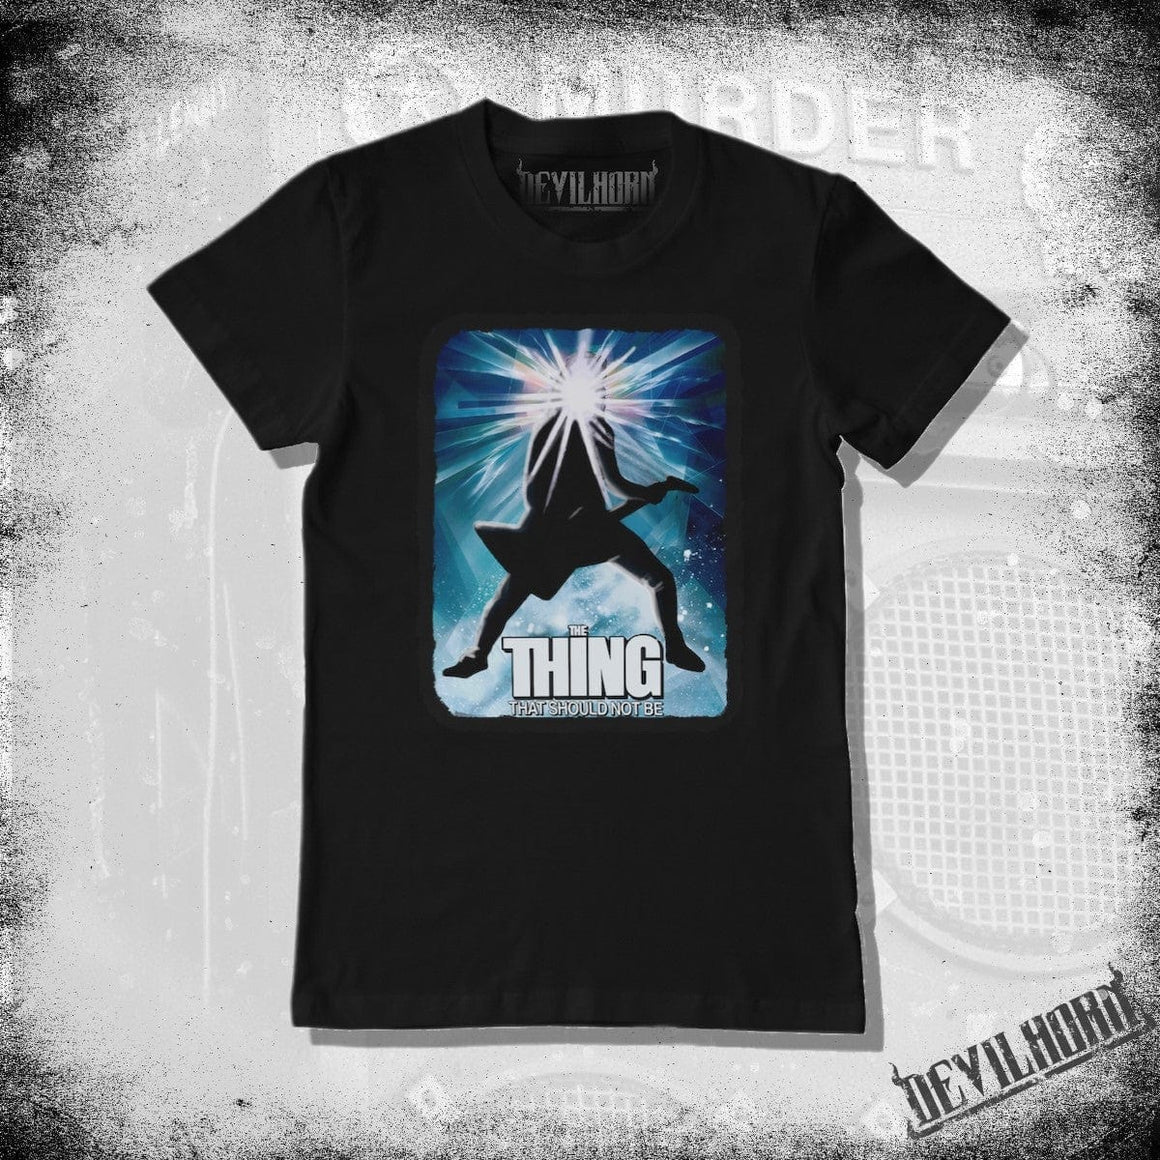 THE THING (that should not be)  t shirt - DEVILHORN